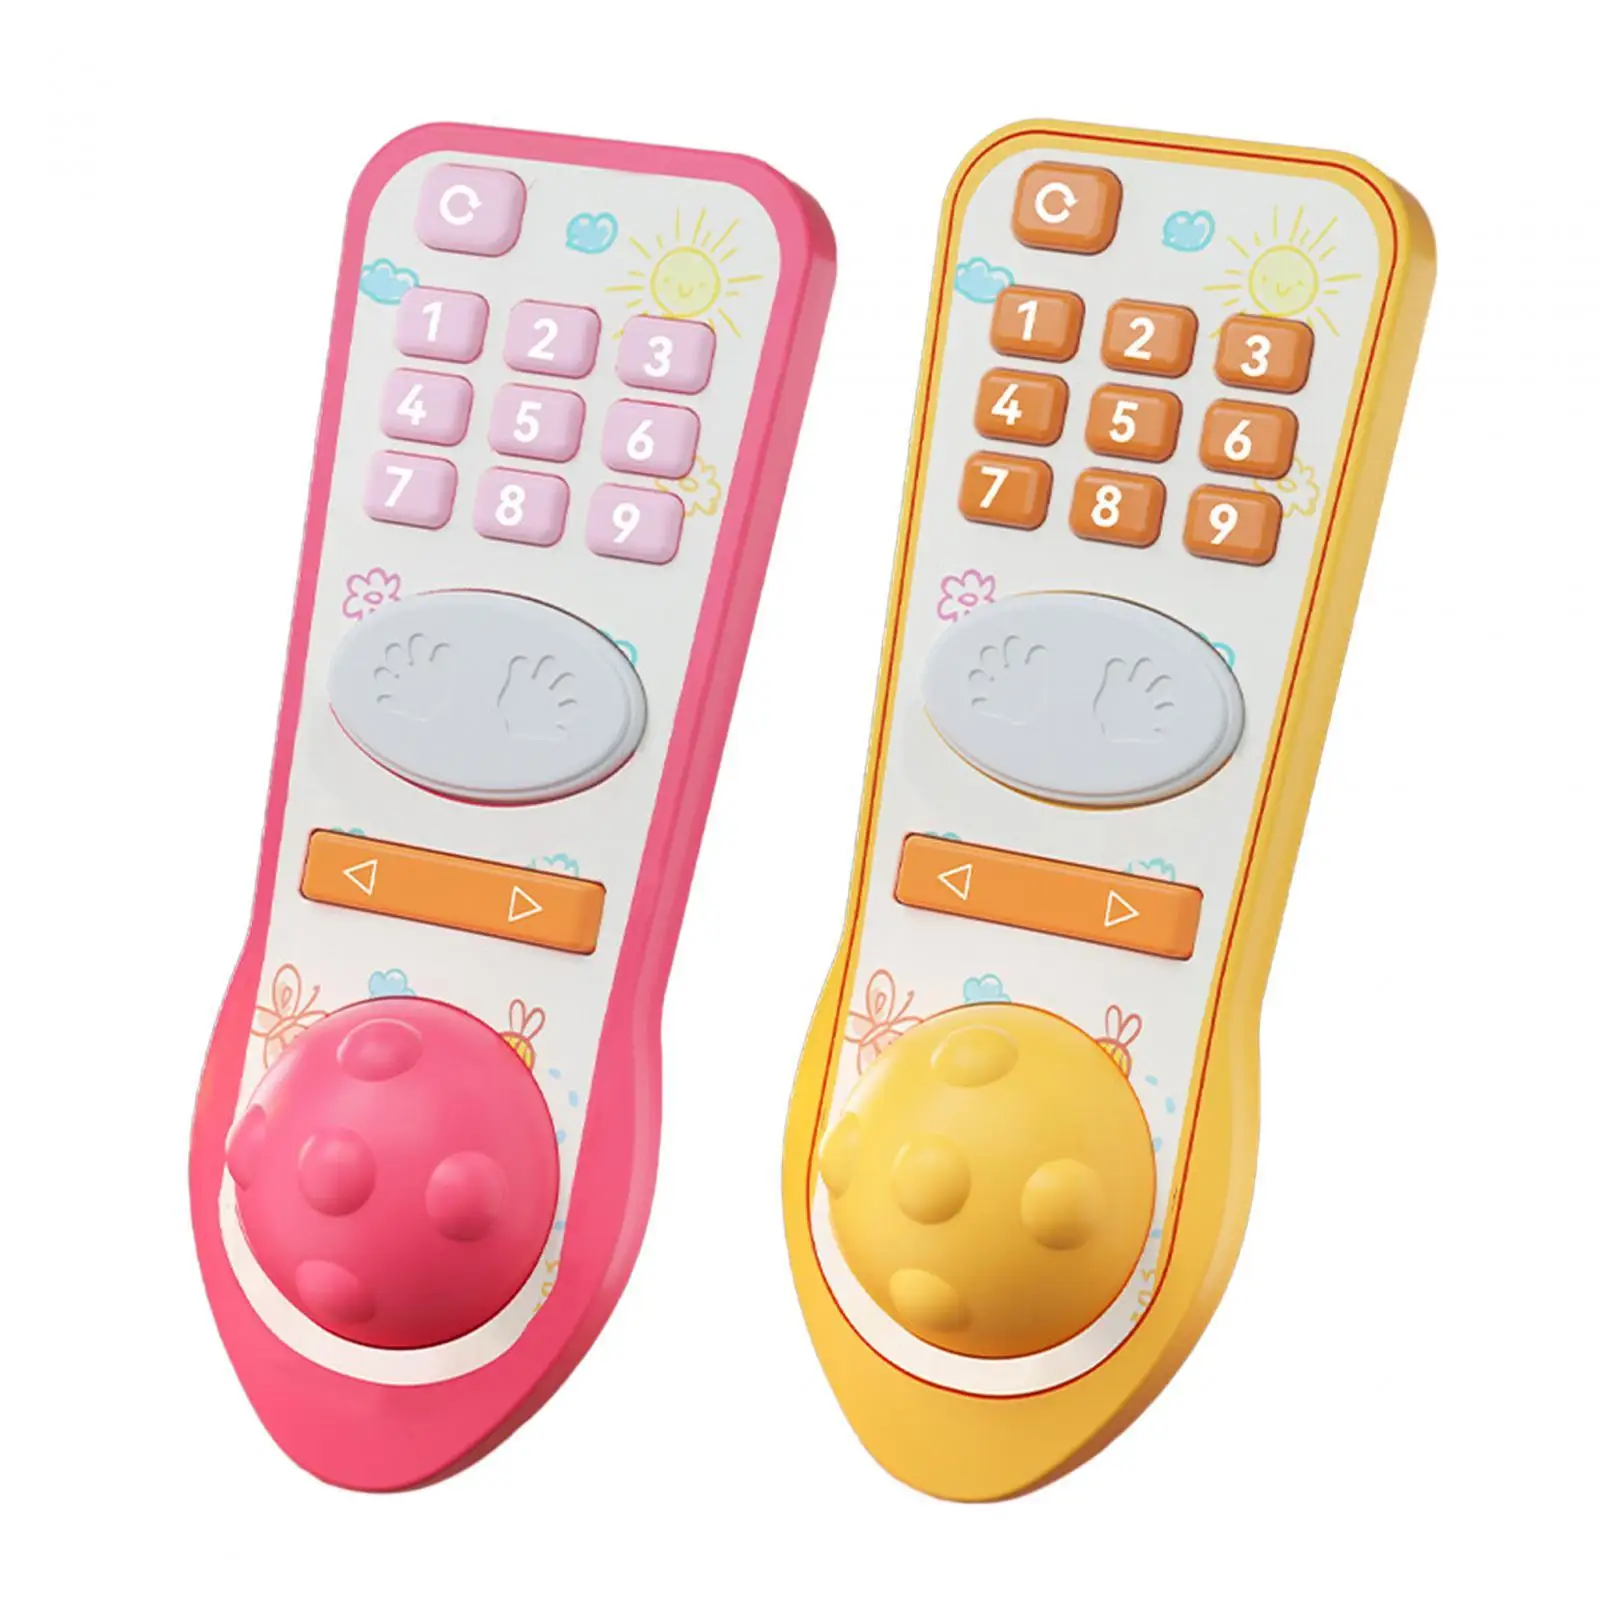 Musical TV Remote Control Toy Fun with Soft Light and Sound Remote Toy for Boys Girls Baby 6 to 12 Months Infants Toddler